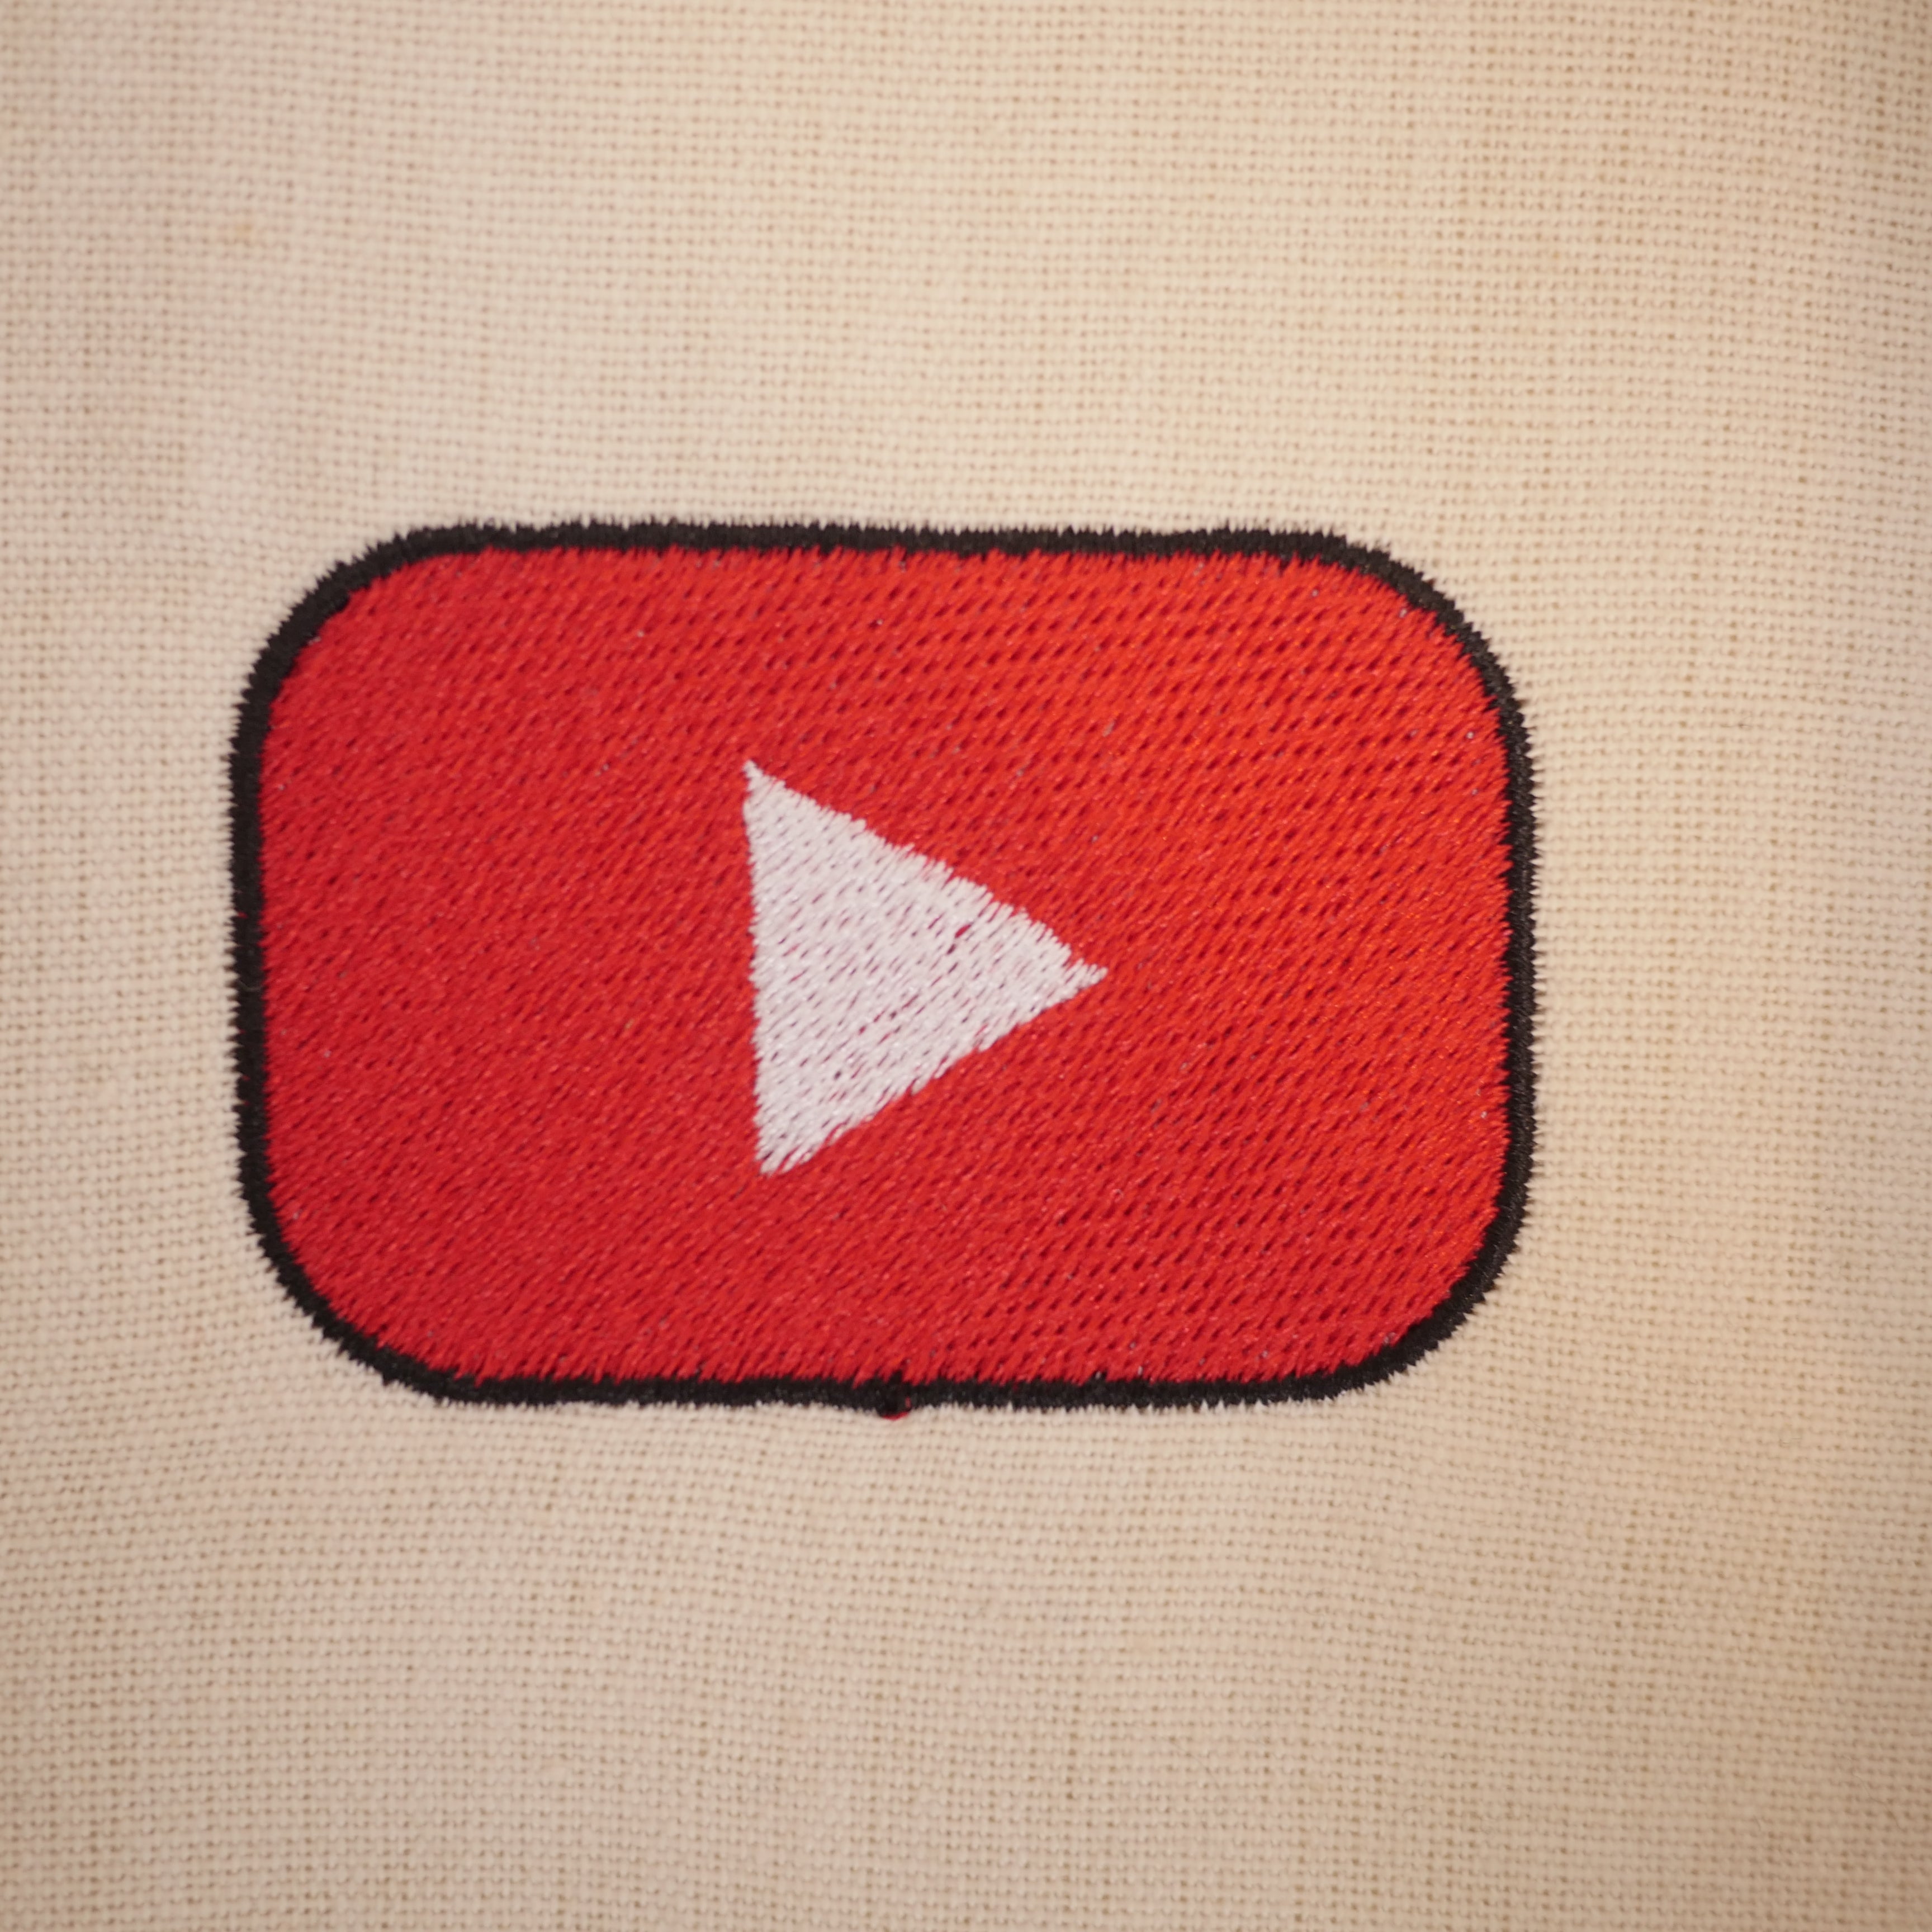 YouTube Play Button Embroidery Design